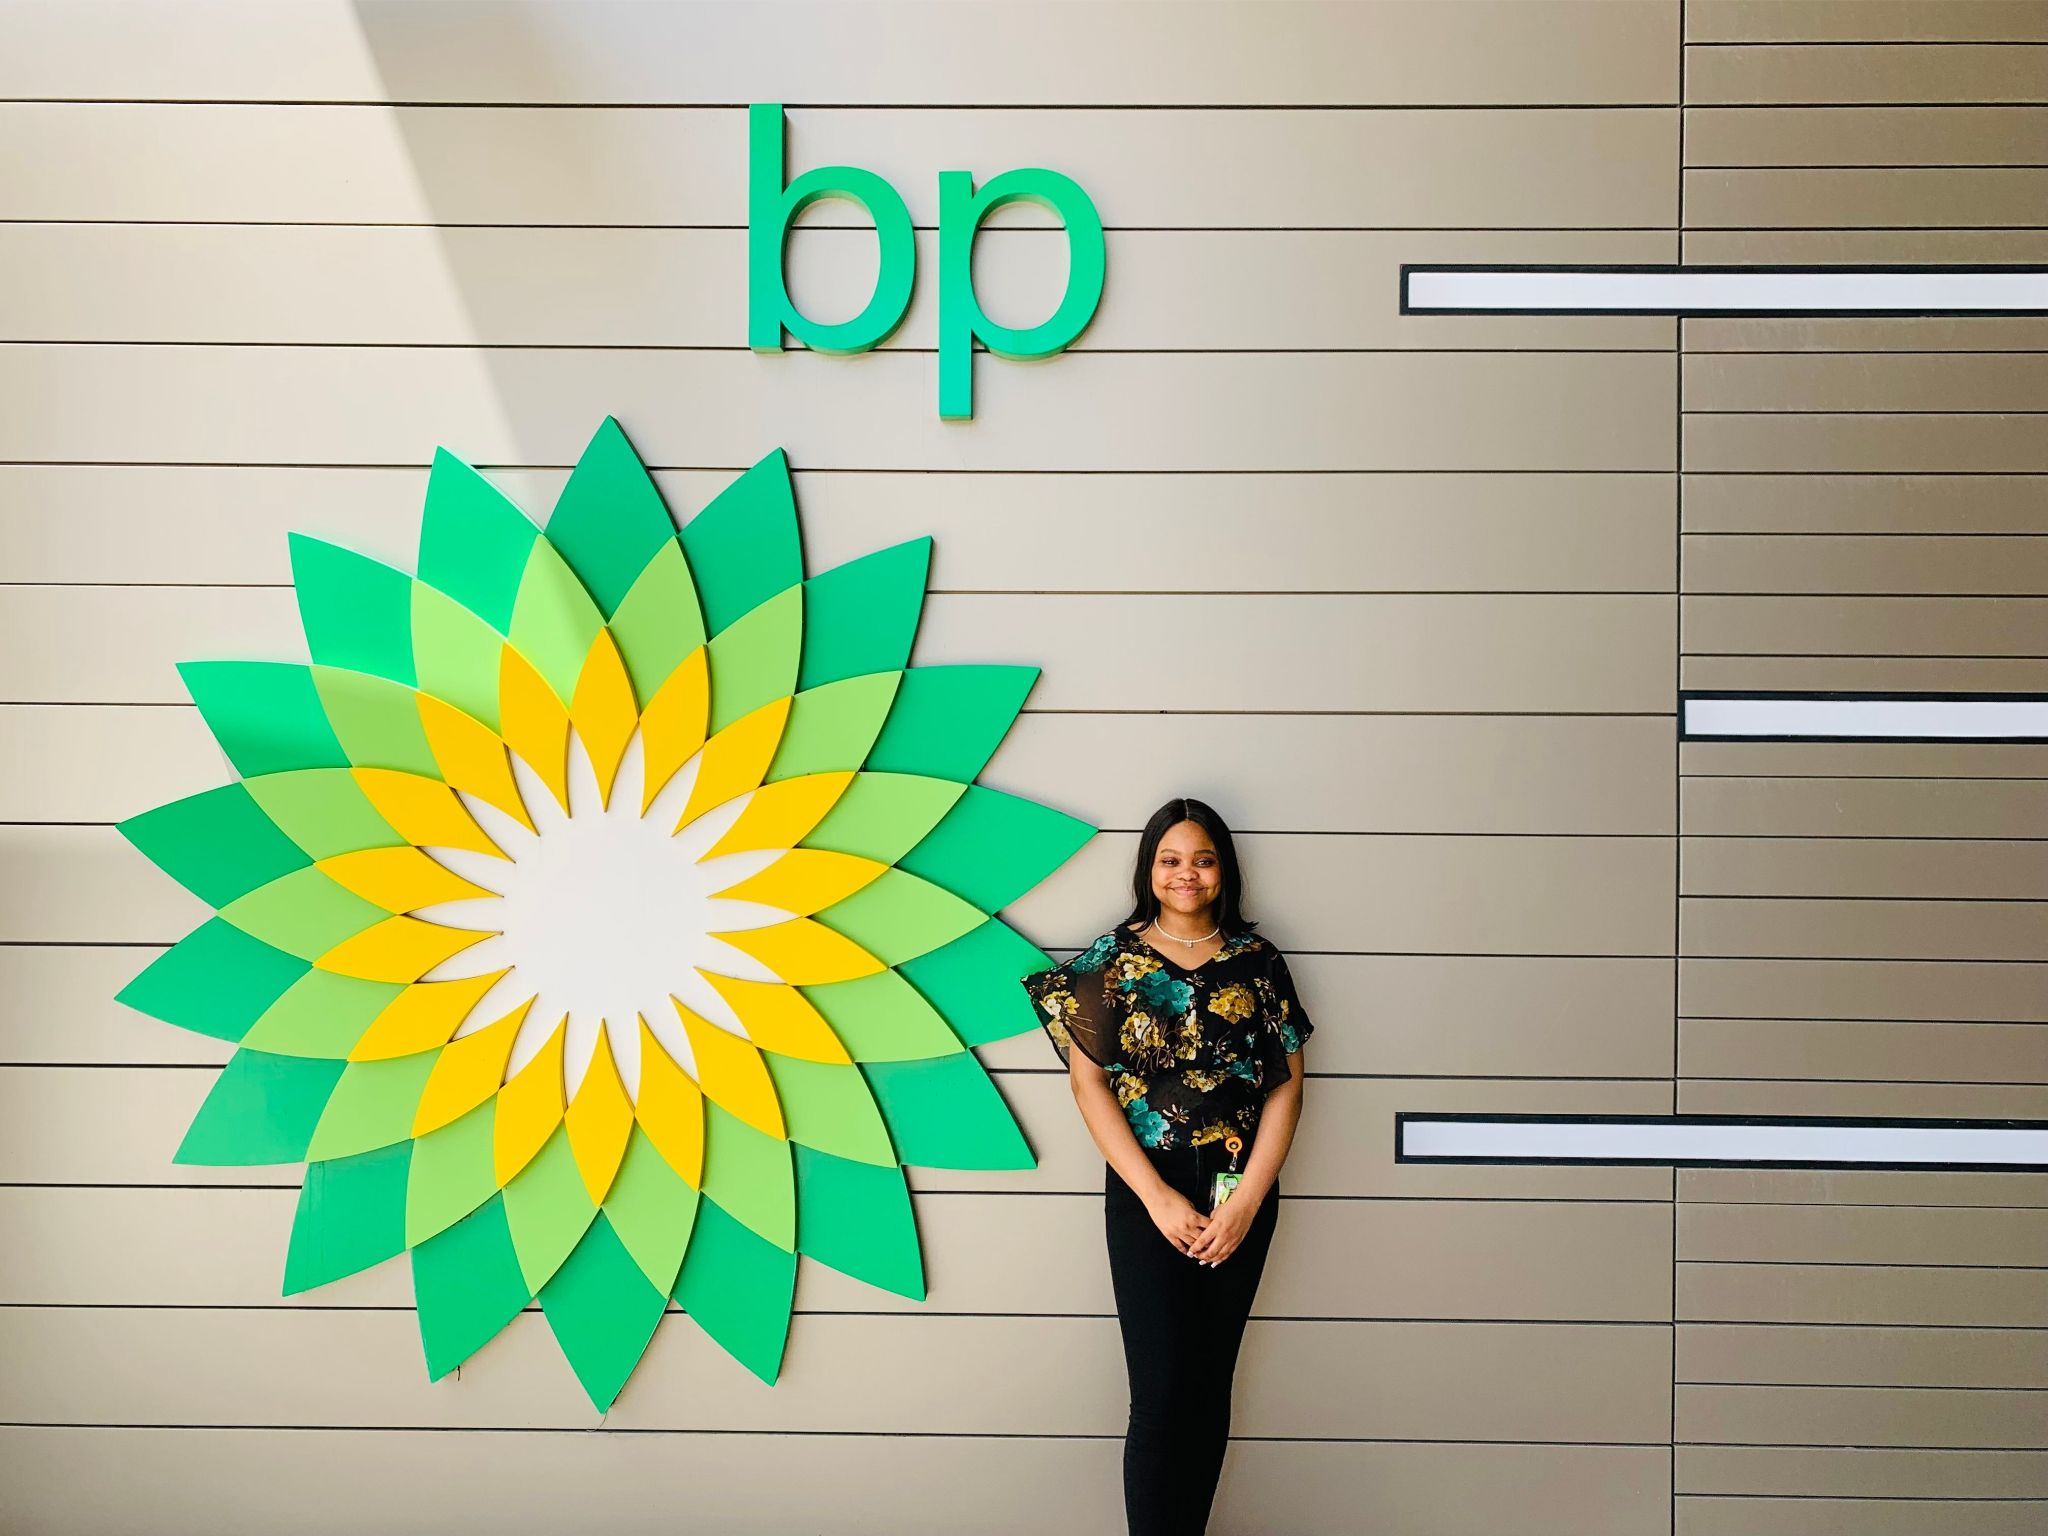 nelly and bp logo